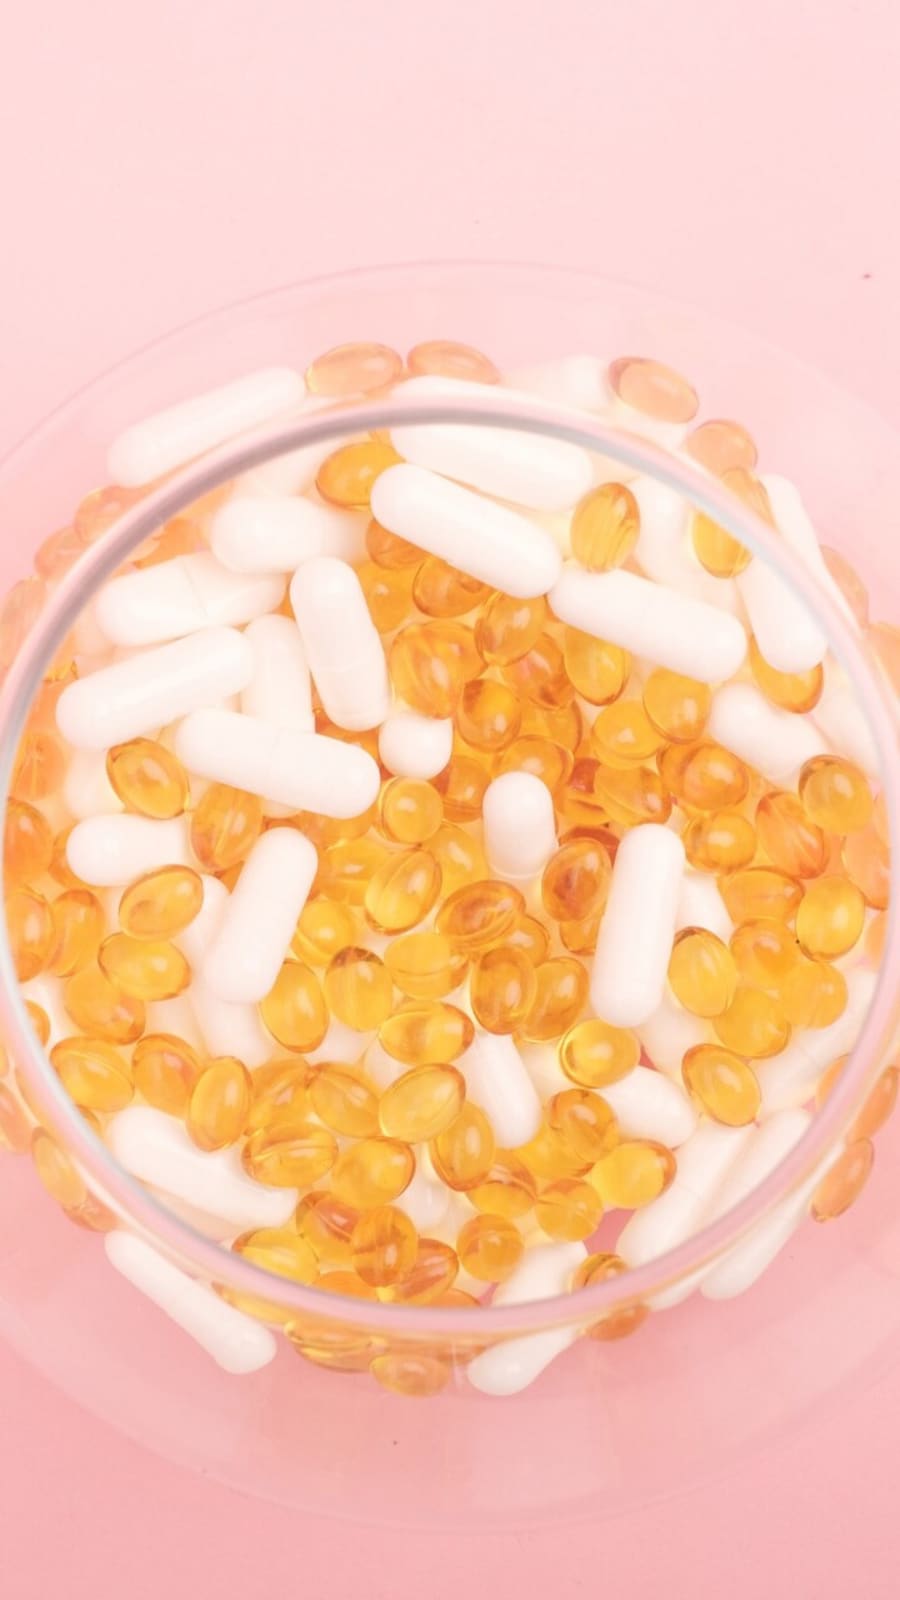 3 Ways To Use Vitamin E Capsule For Stronger Hair